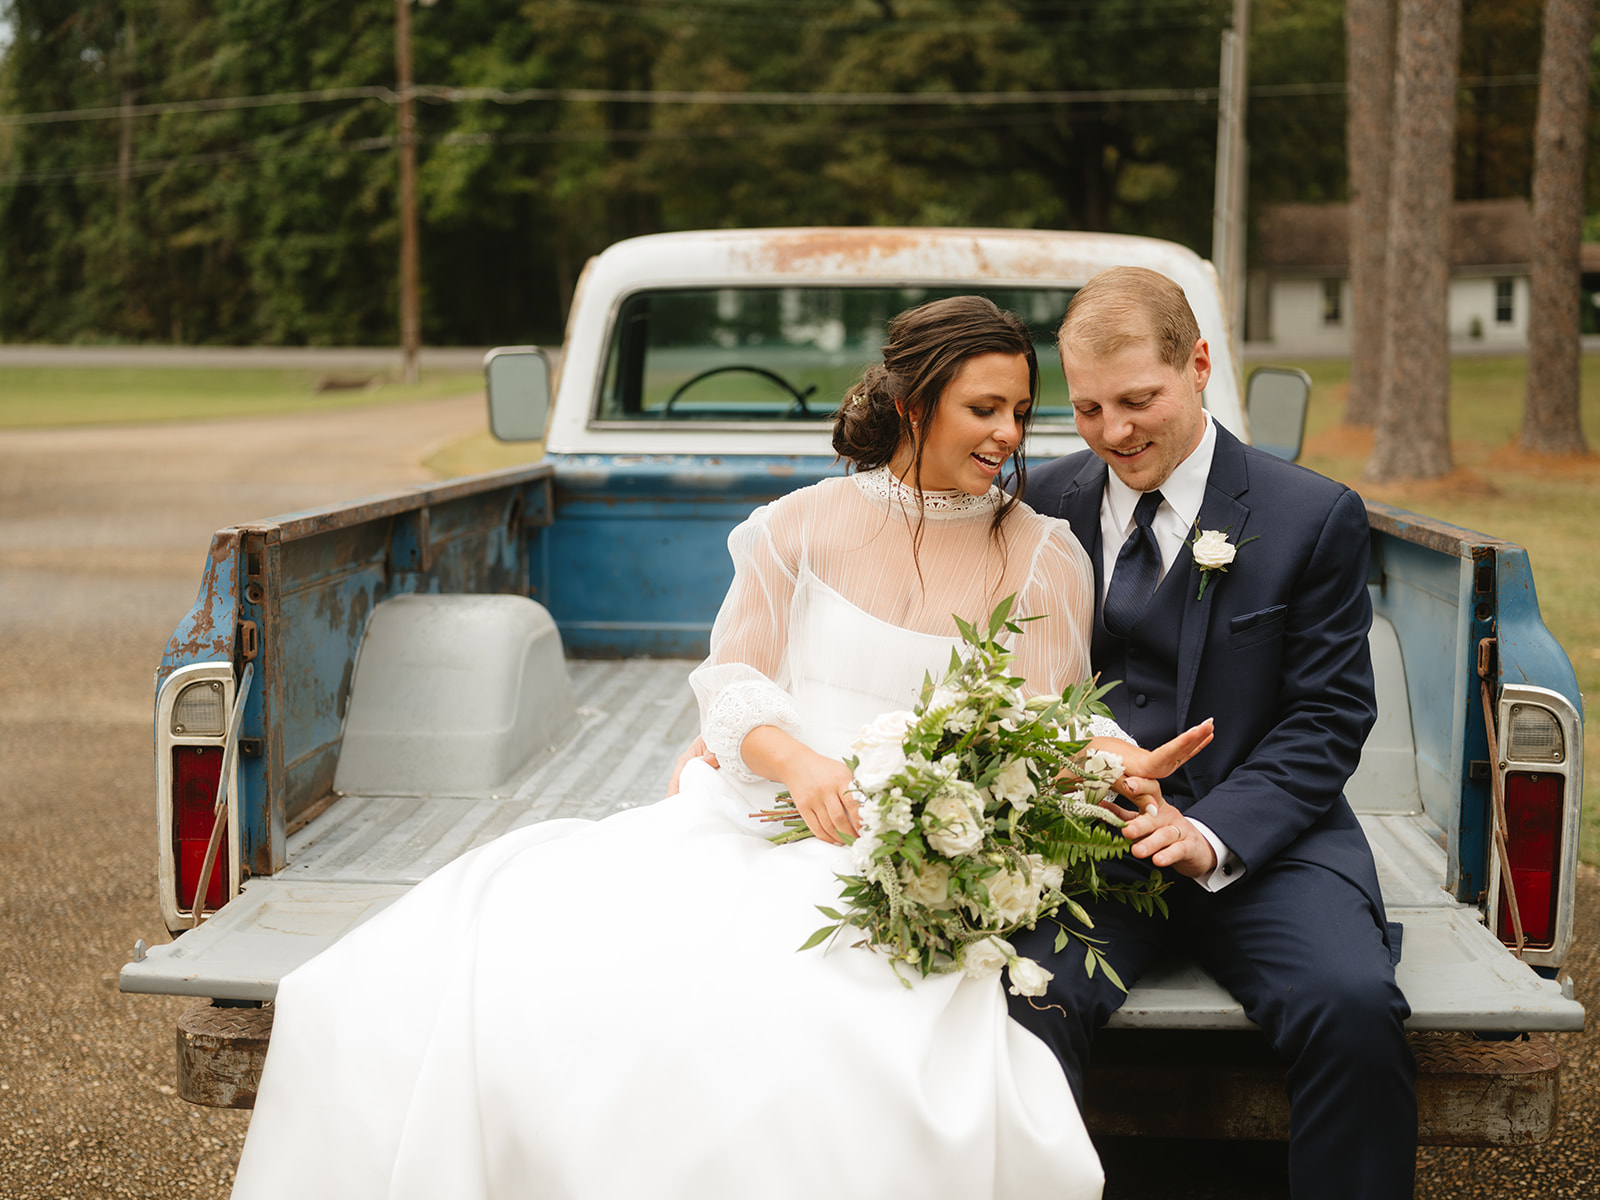 farm truck with bride and groom